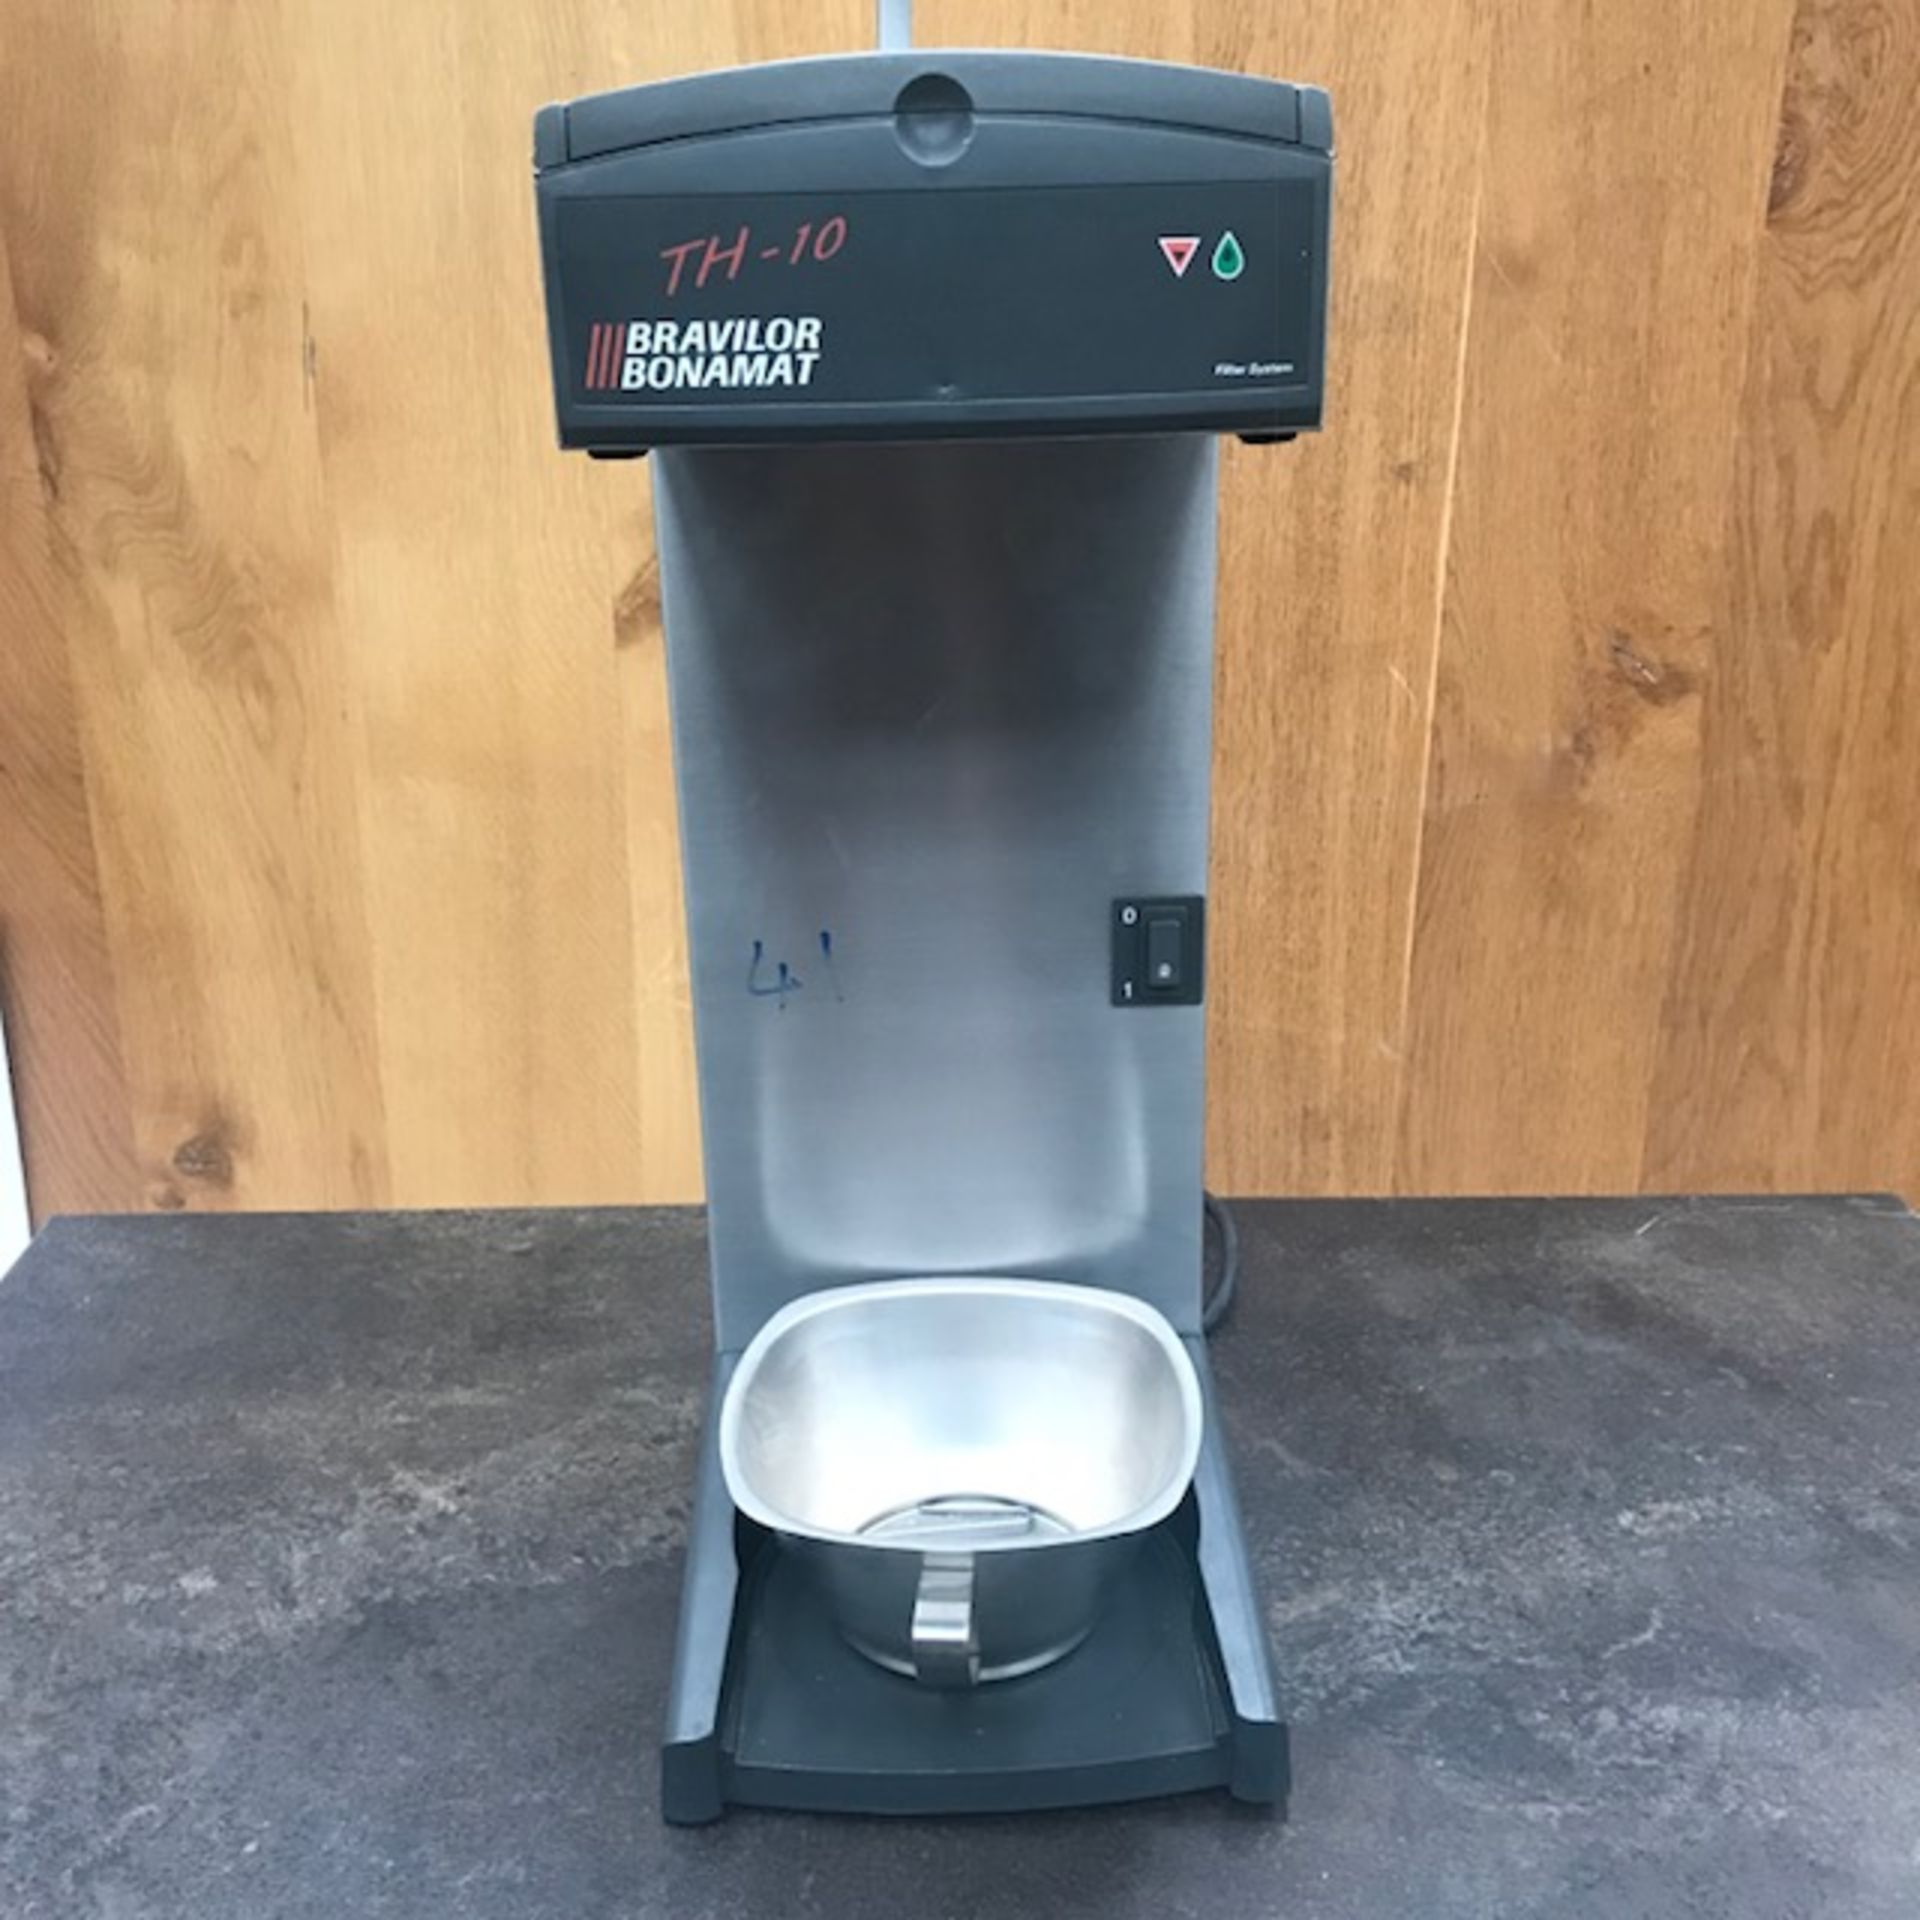 Bravilor Bonamat UIO Coffee filter Quick filter machine for locations without water connection.